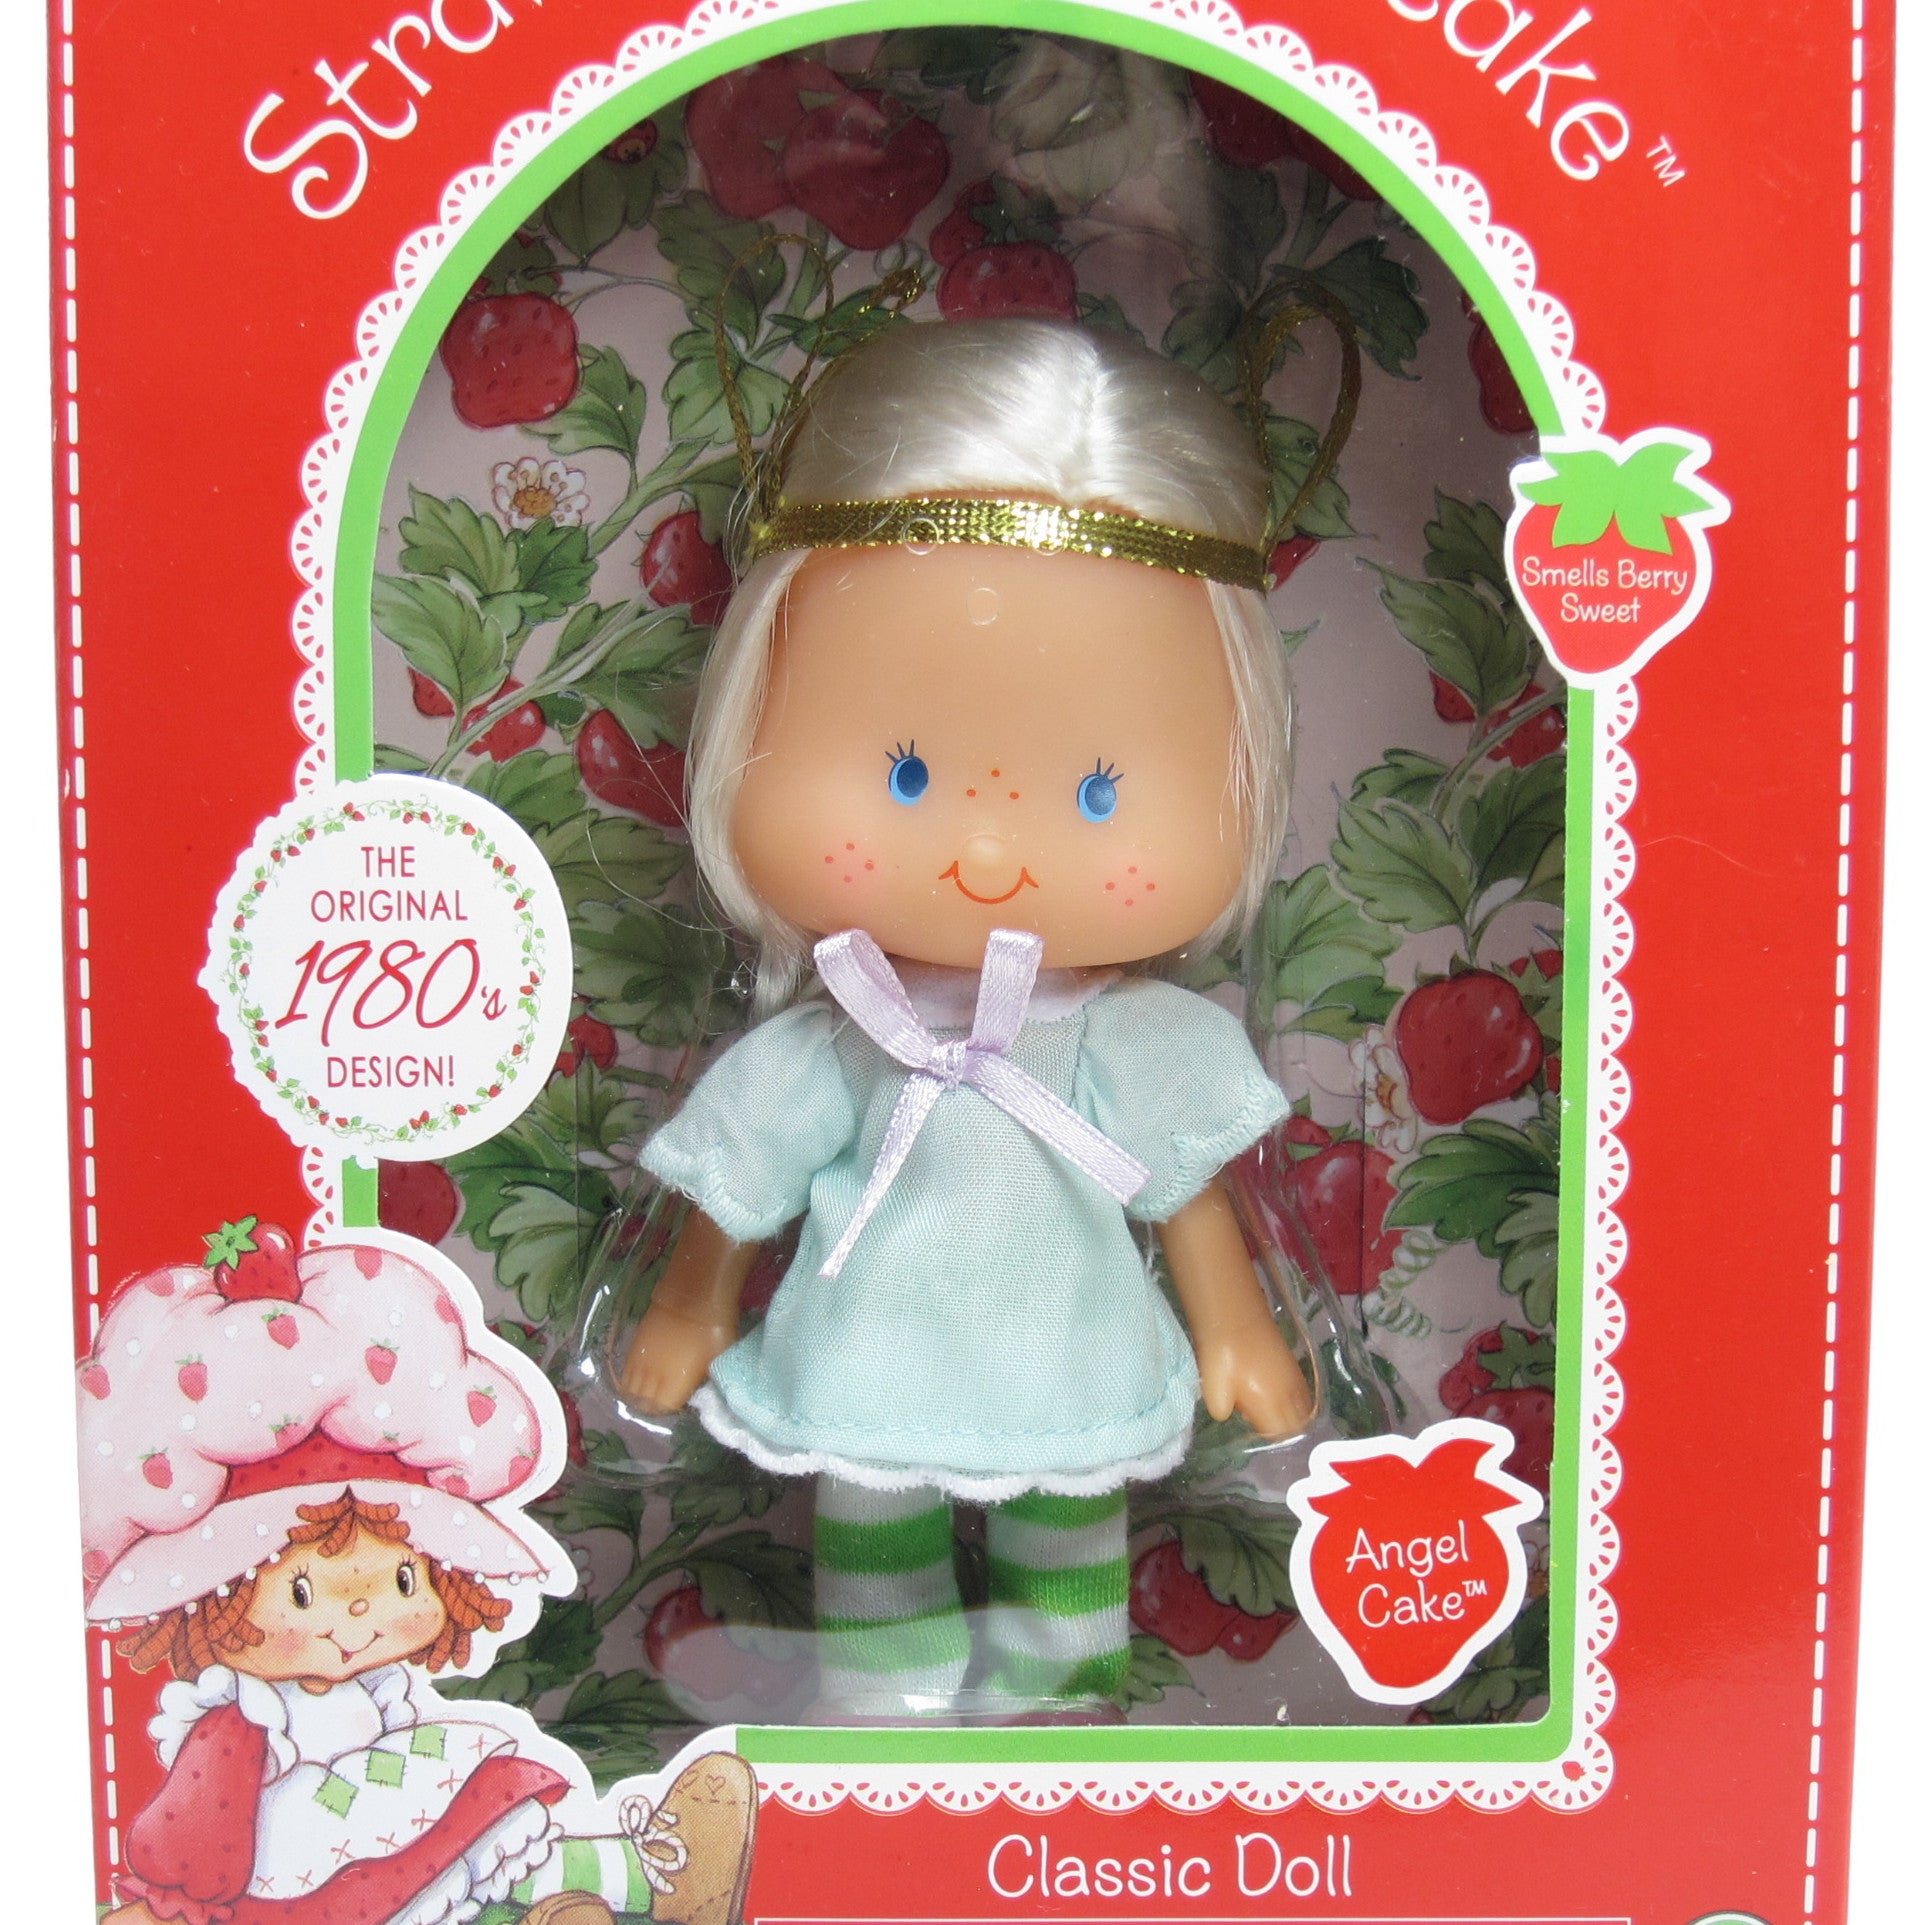 Angel Cake Reissue 1980s Design Classic Doll | Brown Eyed Rose